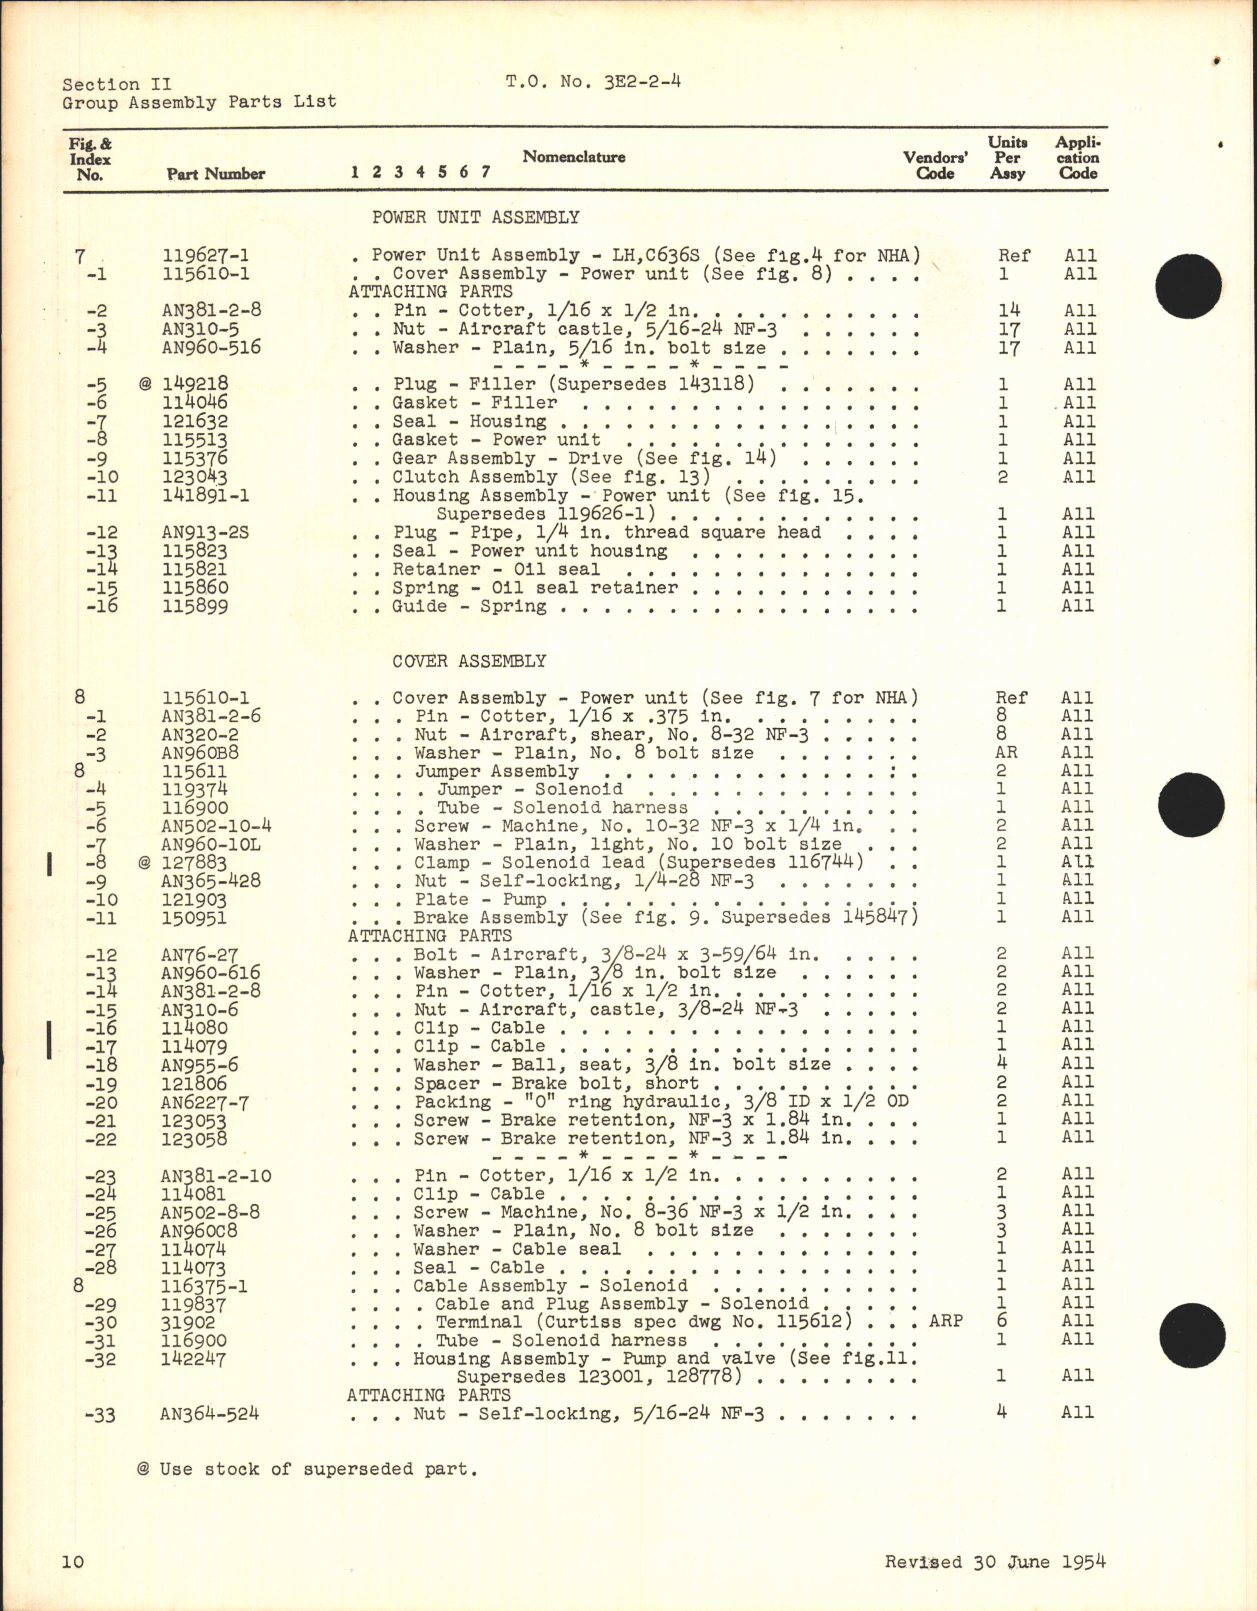 Sample page 4 from AirCorps Library document: Parts Catalog for Curtiss Propeller Models C646SP-A